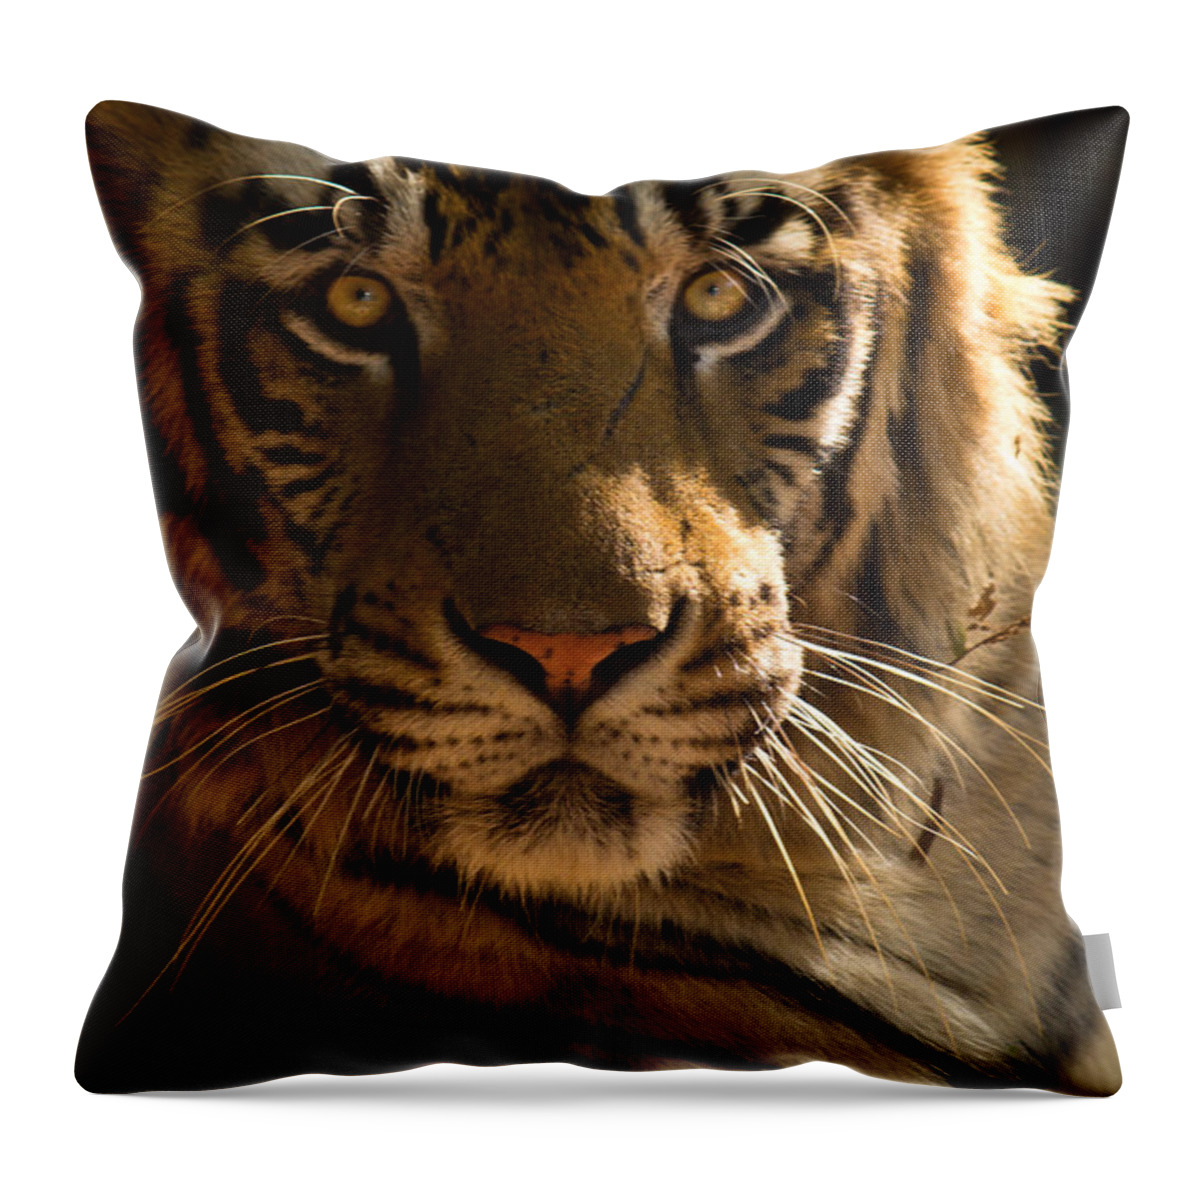 Tiger Throw Pillow featuring the photograph Royalty by SAURAVphoto Online Store